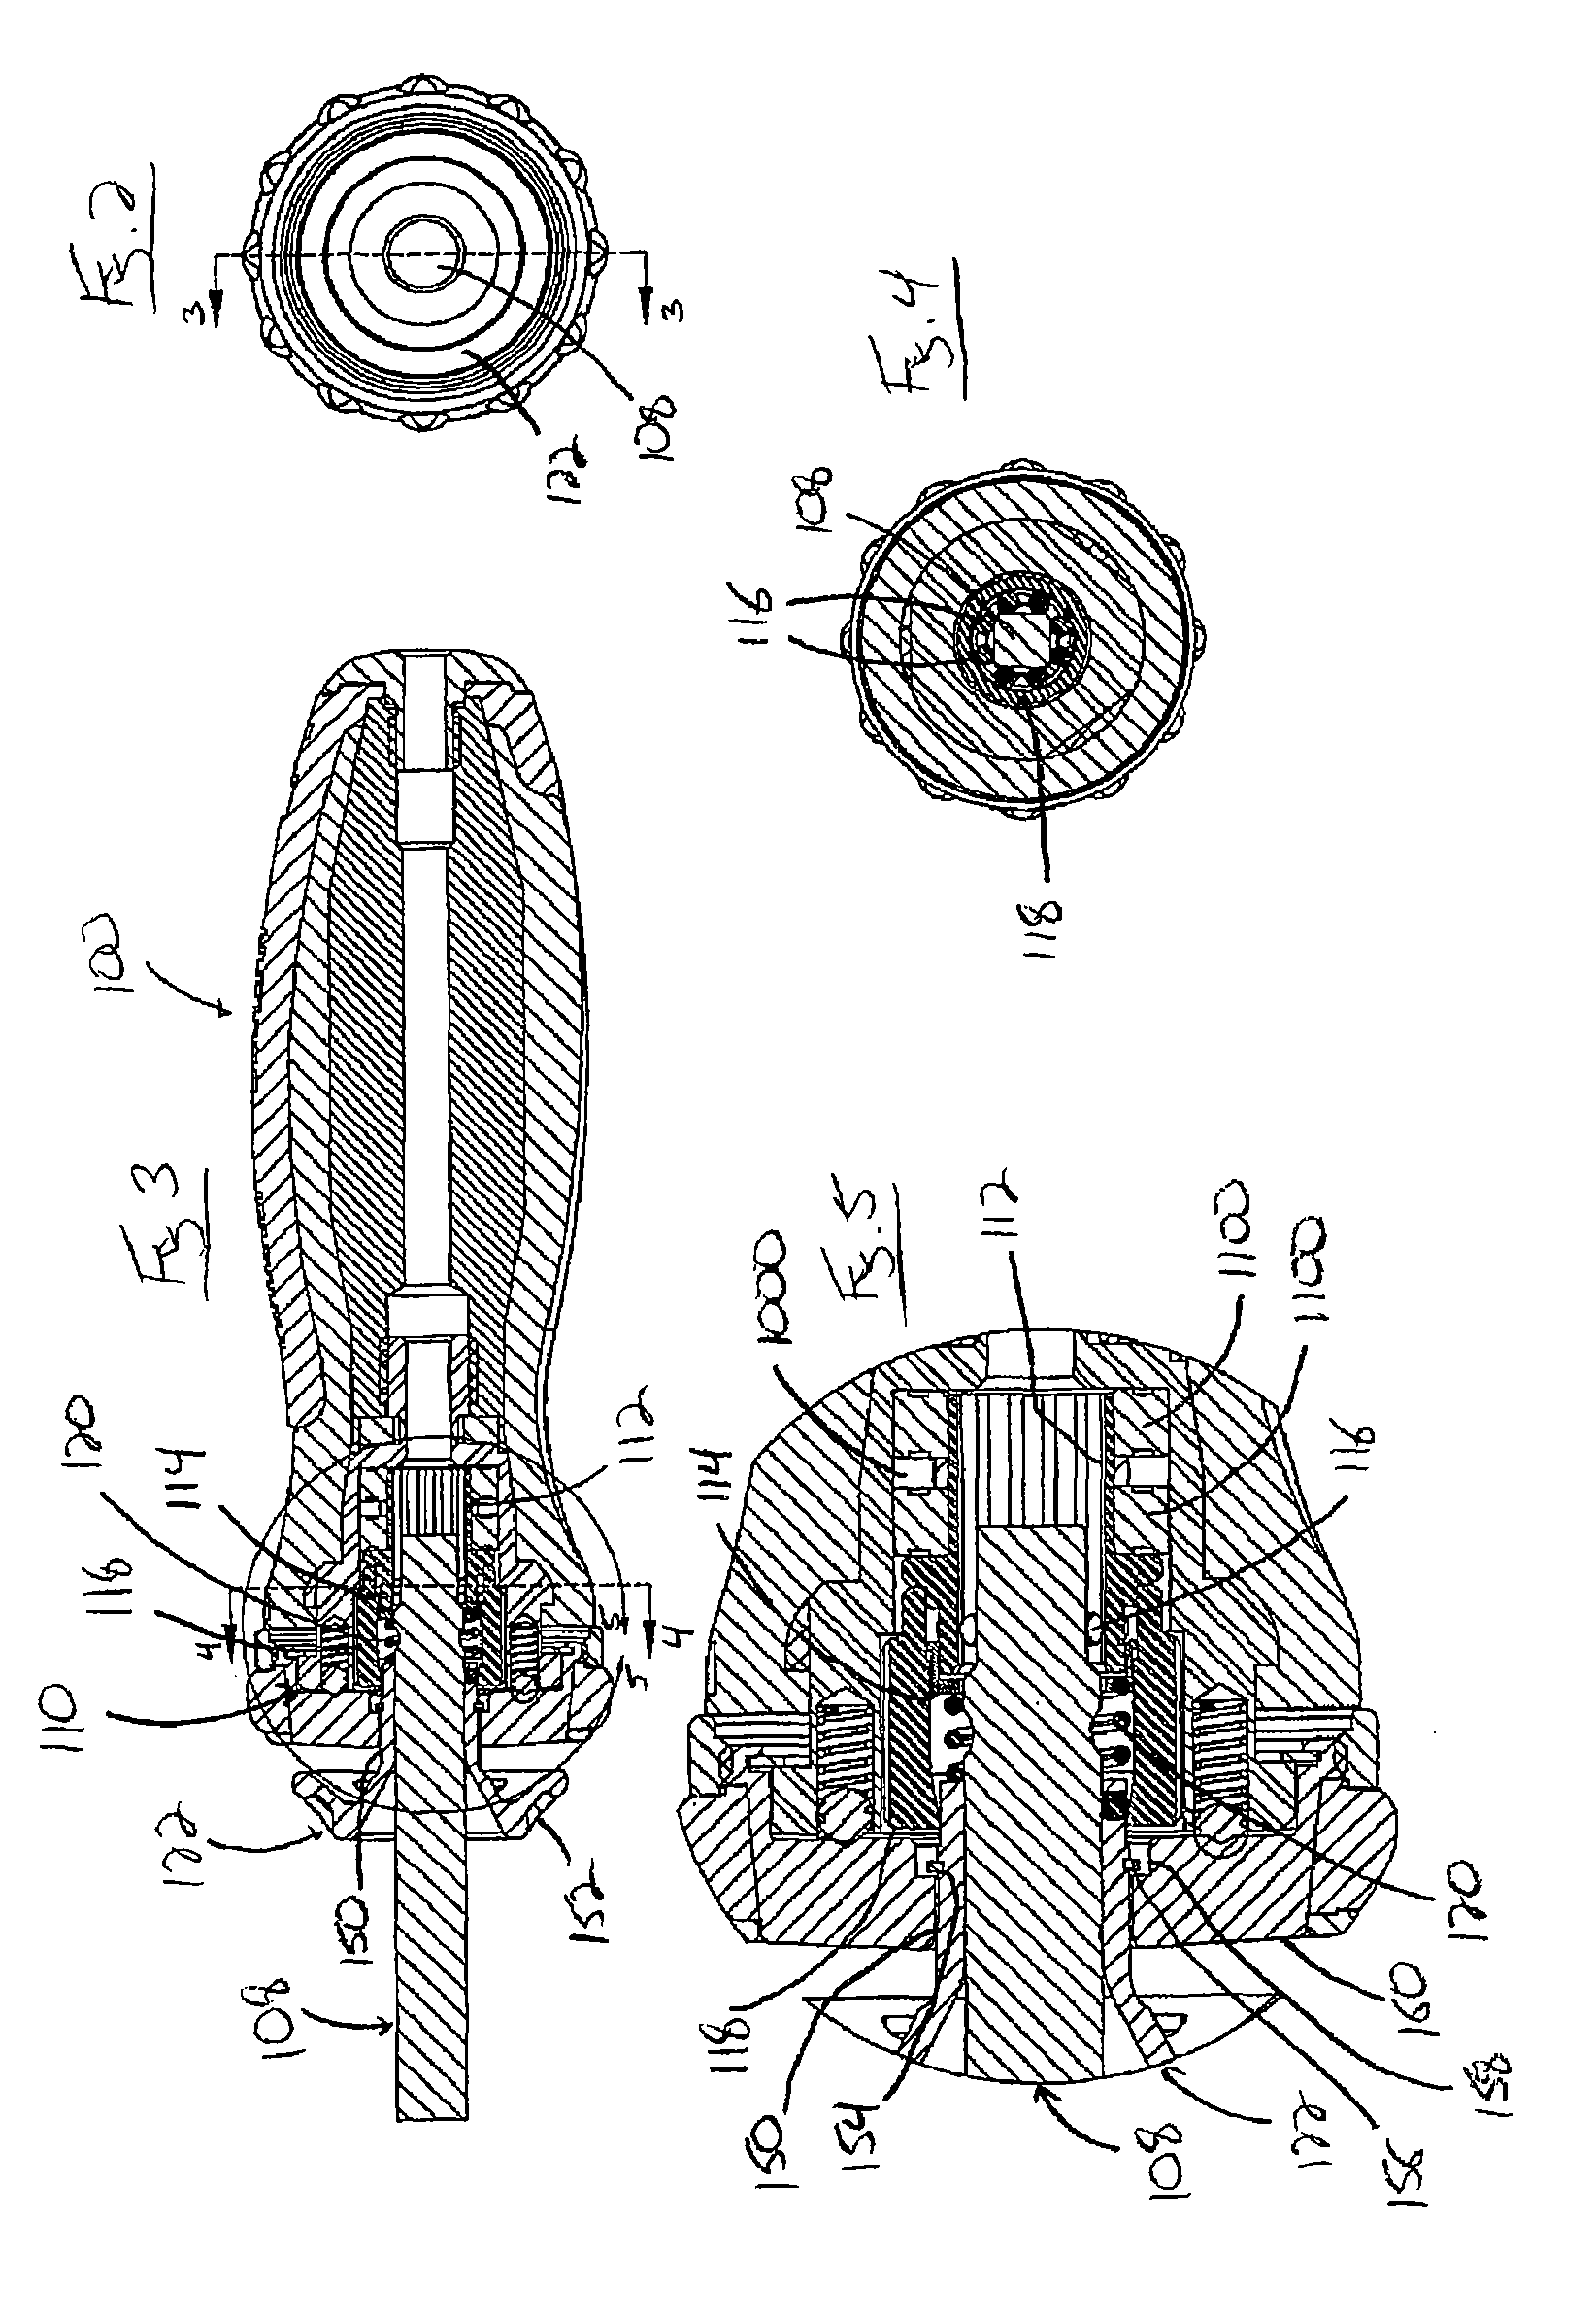 Shaft securing mechanism for a tool